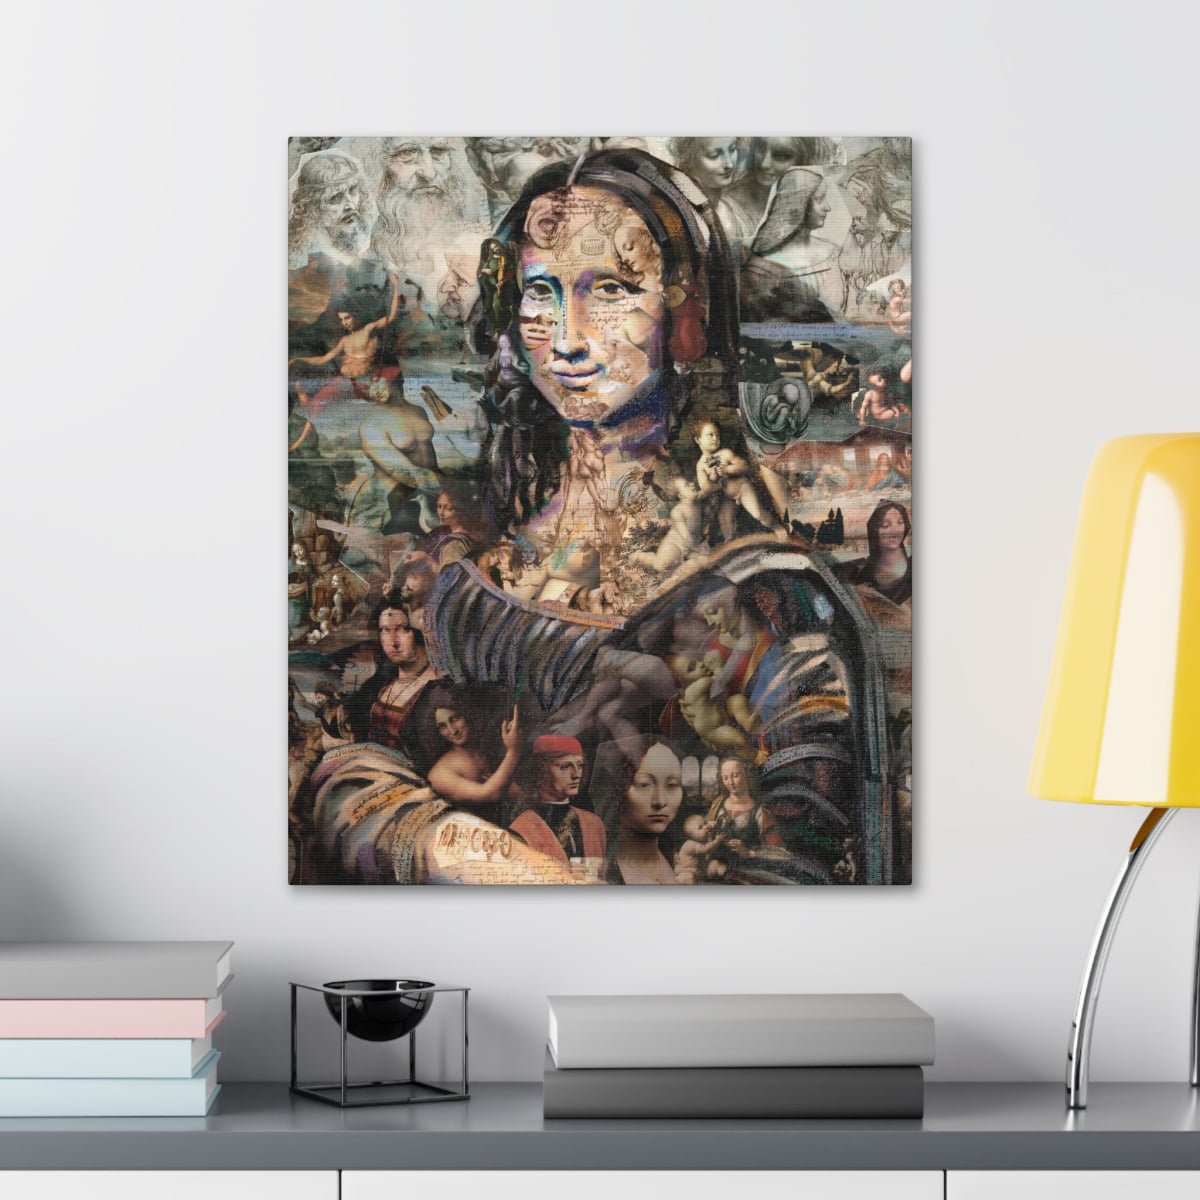 Discover the Surreal: Mona Lisa Collage Canvas